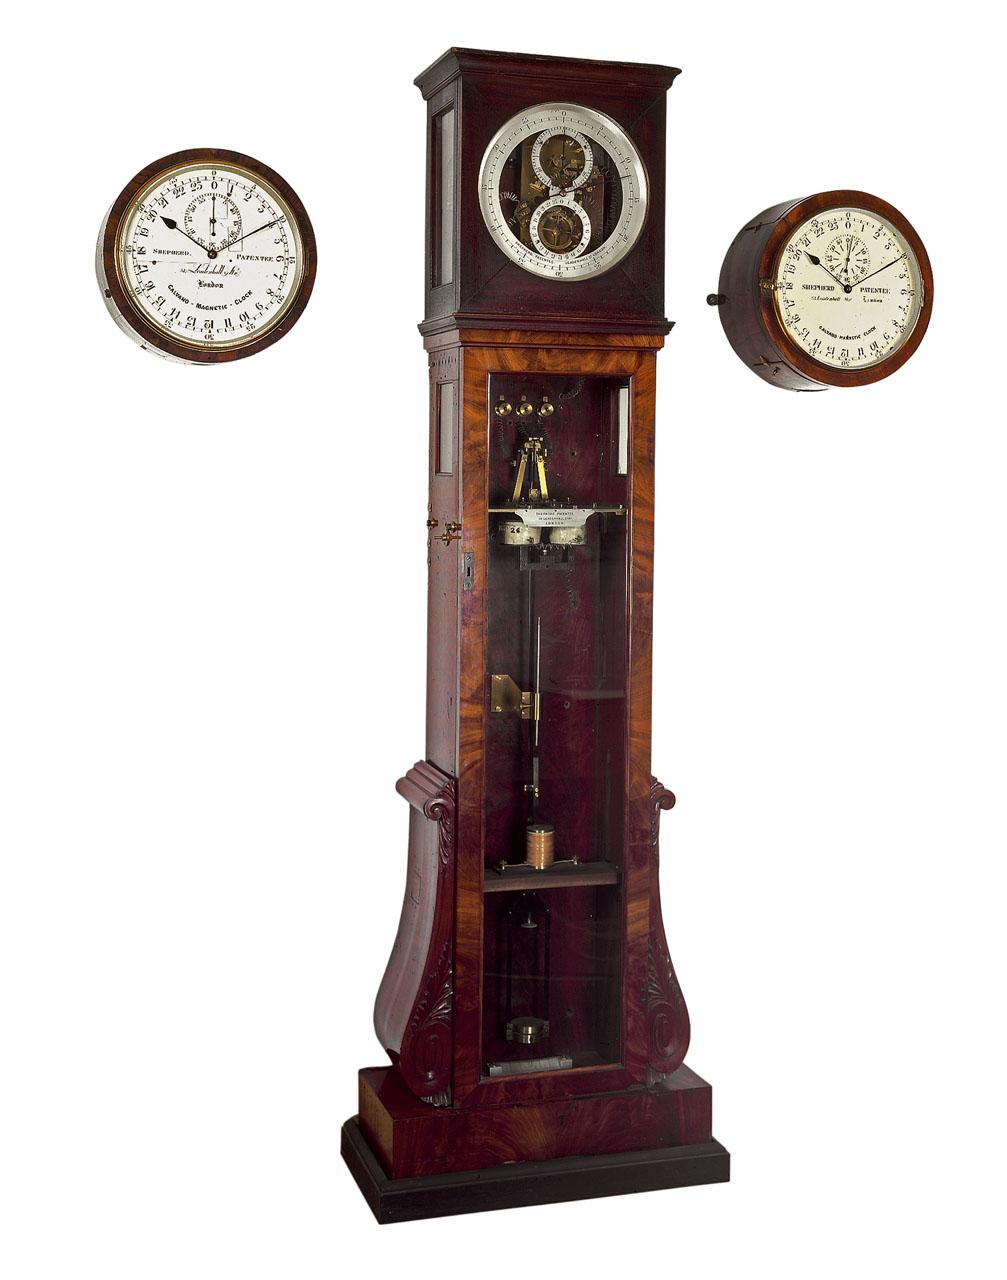 Image of a tall clock with a pendulum